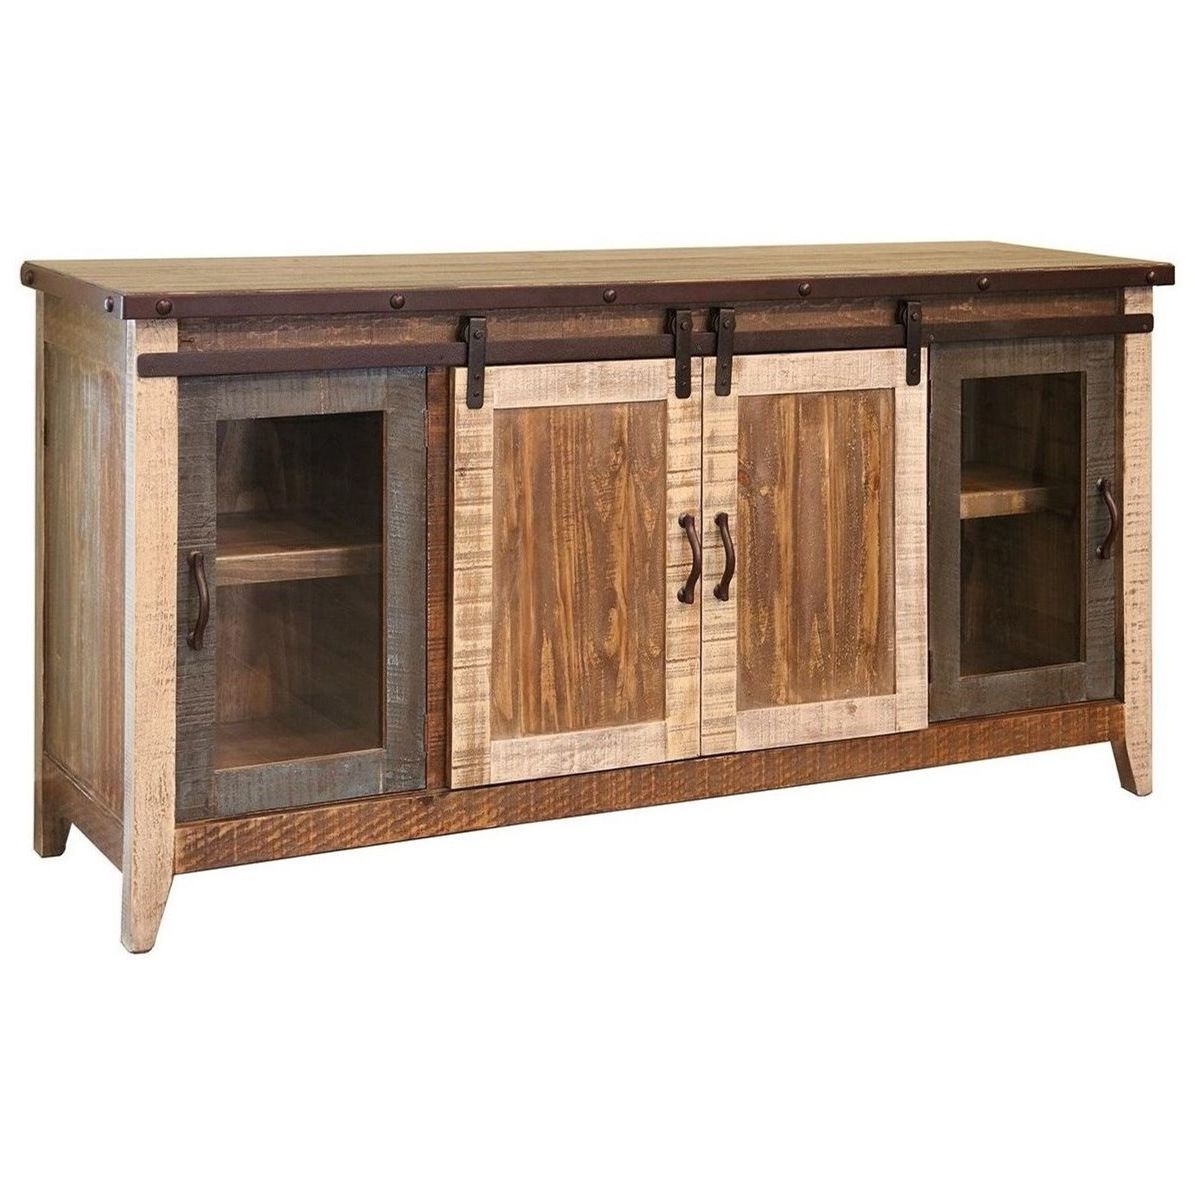 Recent Vfm Signature 900 Antique Rustic 70" Tv Stand With Sliding Within Robinson Rustic Farmhouse Sliding Barn Door Corner Tv Stands (View 10 of 10)